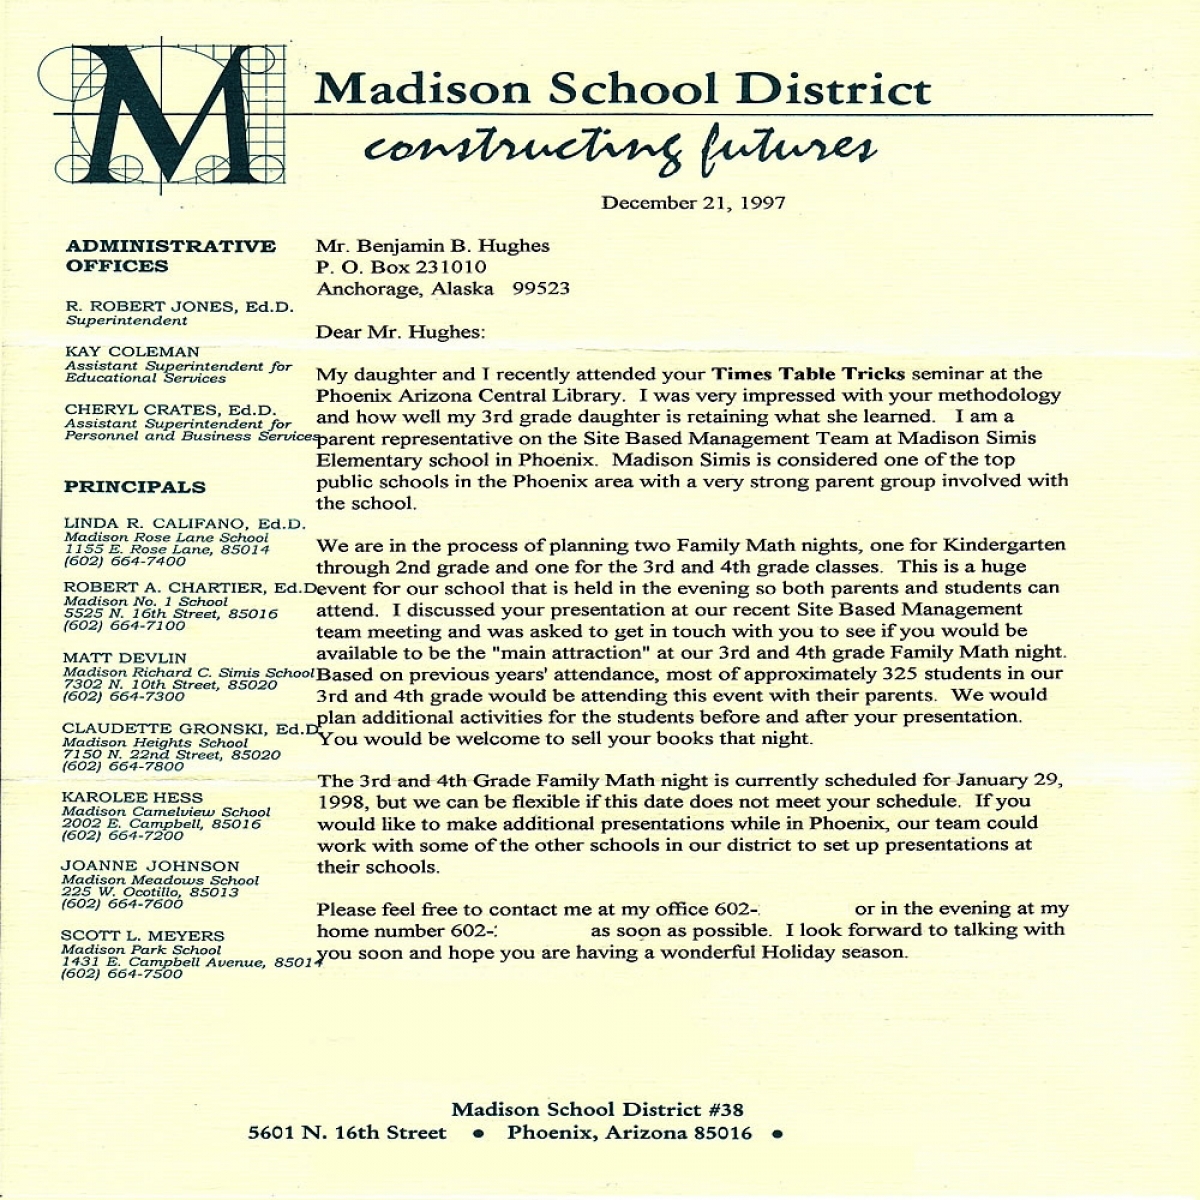 Madison School District impressed with "Times Table Tricks"